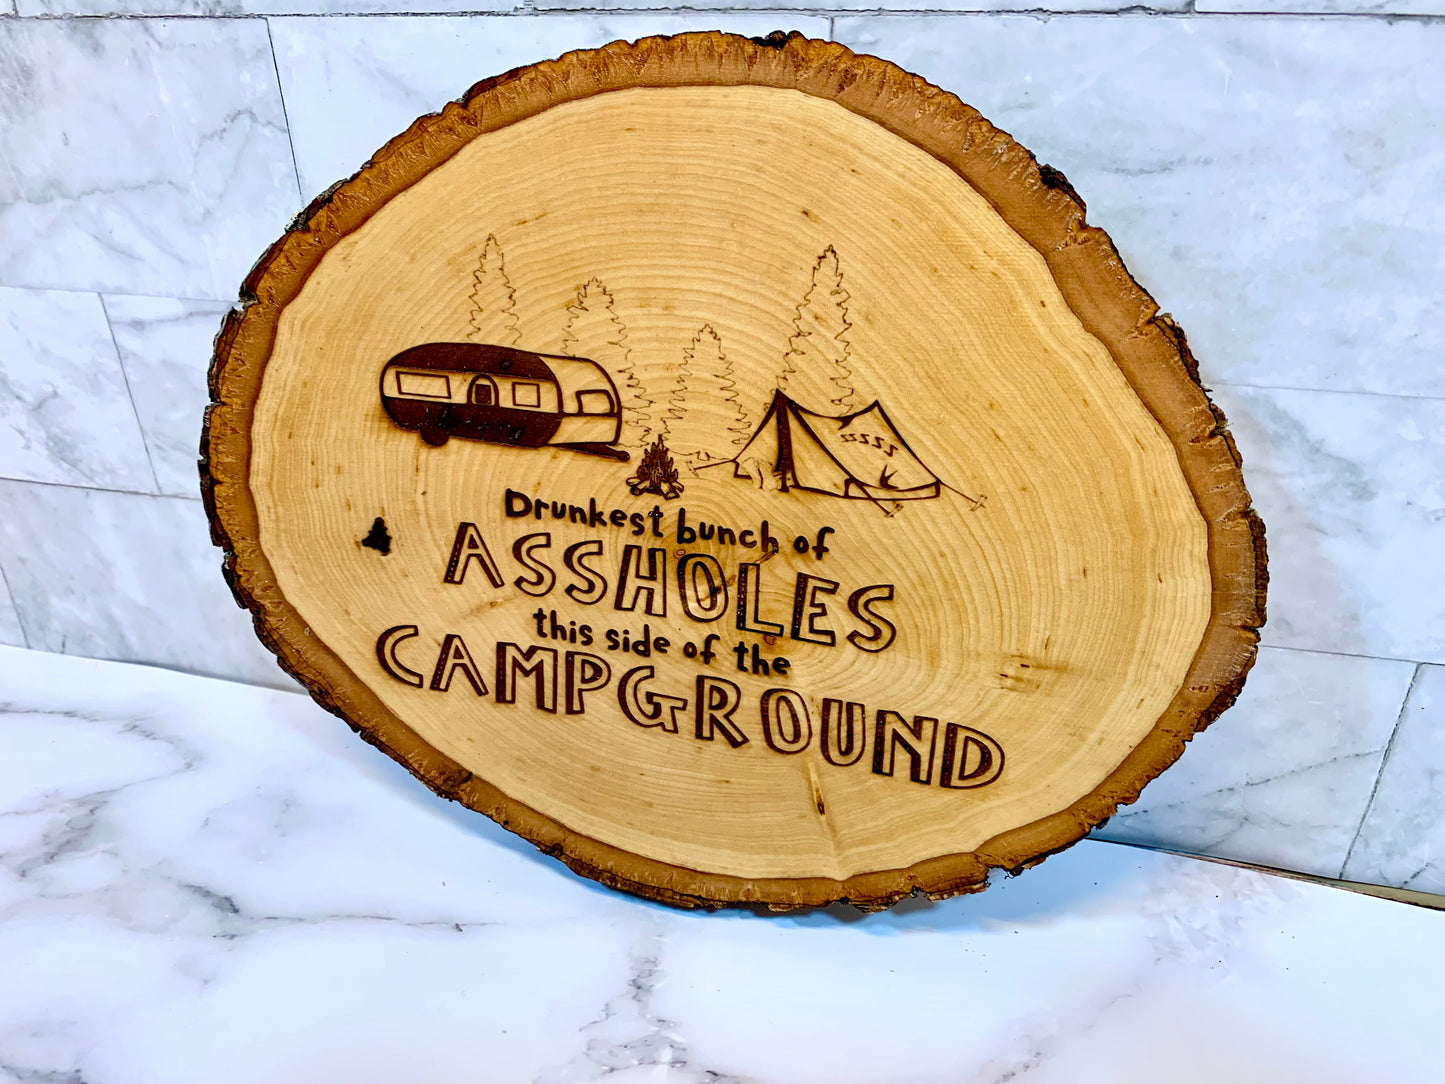 Drunkest Bunch Of Asshole’s This Side Of The Camp Ground Live Edge Wooden Camping Sign - MixMatched Creations